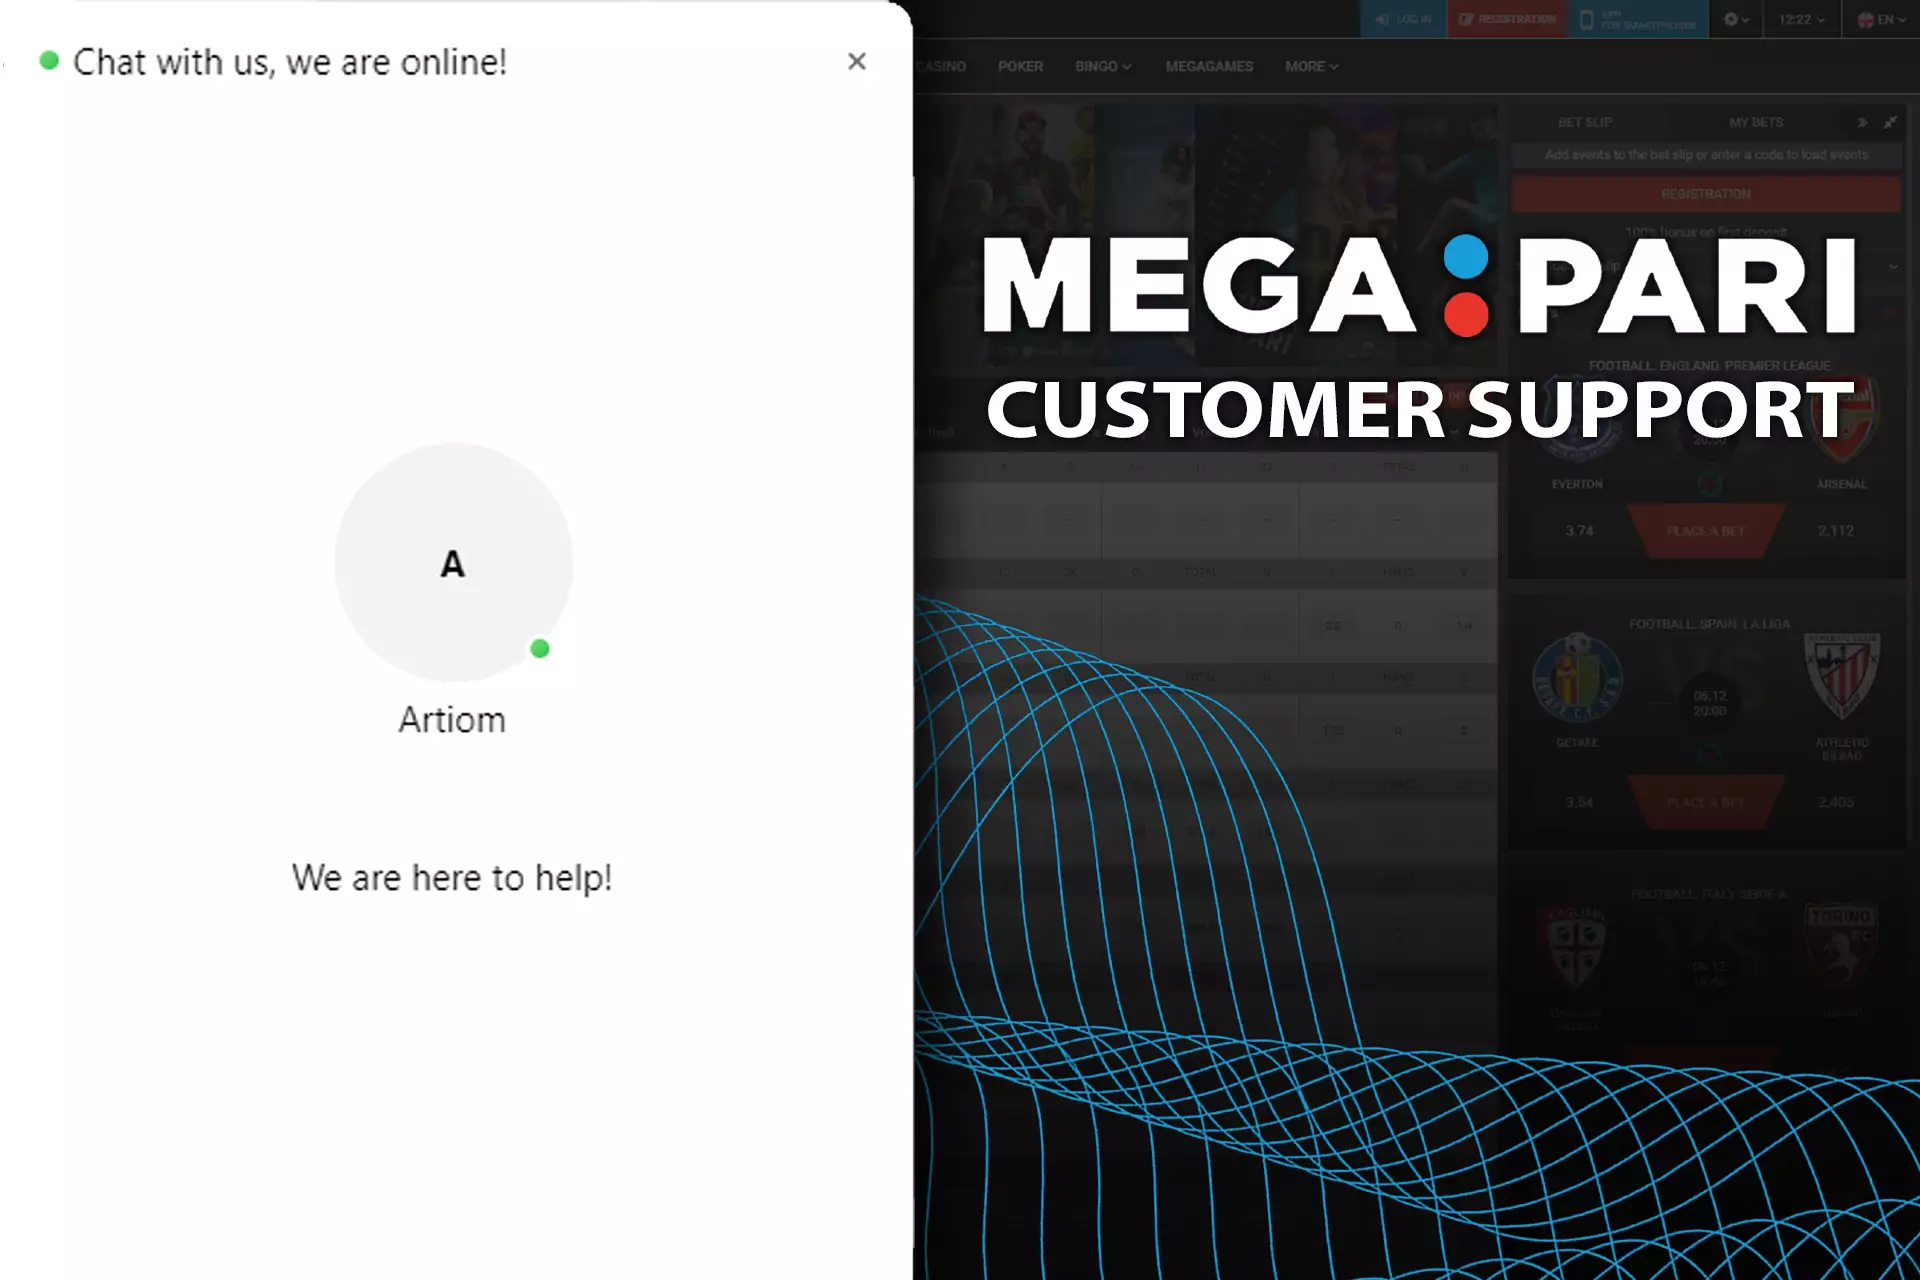 The MegaPari customer support works 24/7 and is always ready to help you.